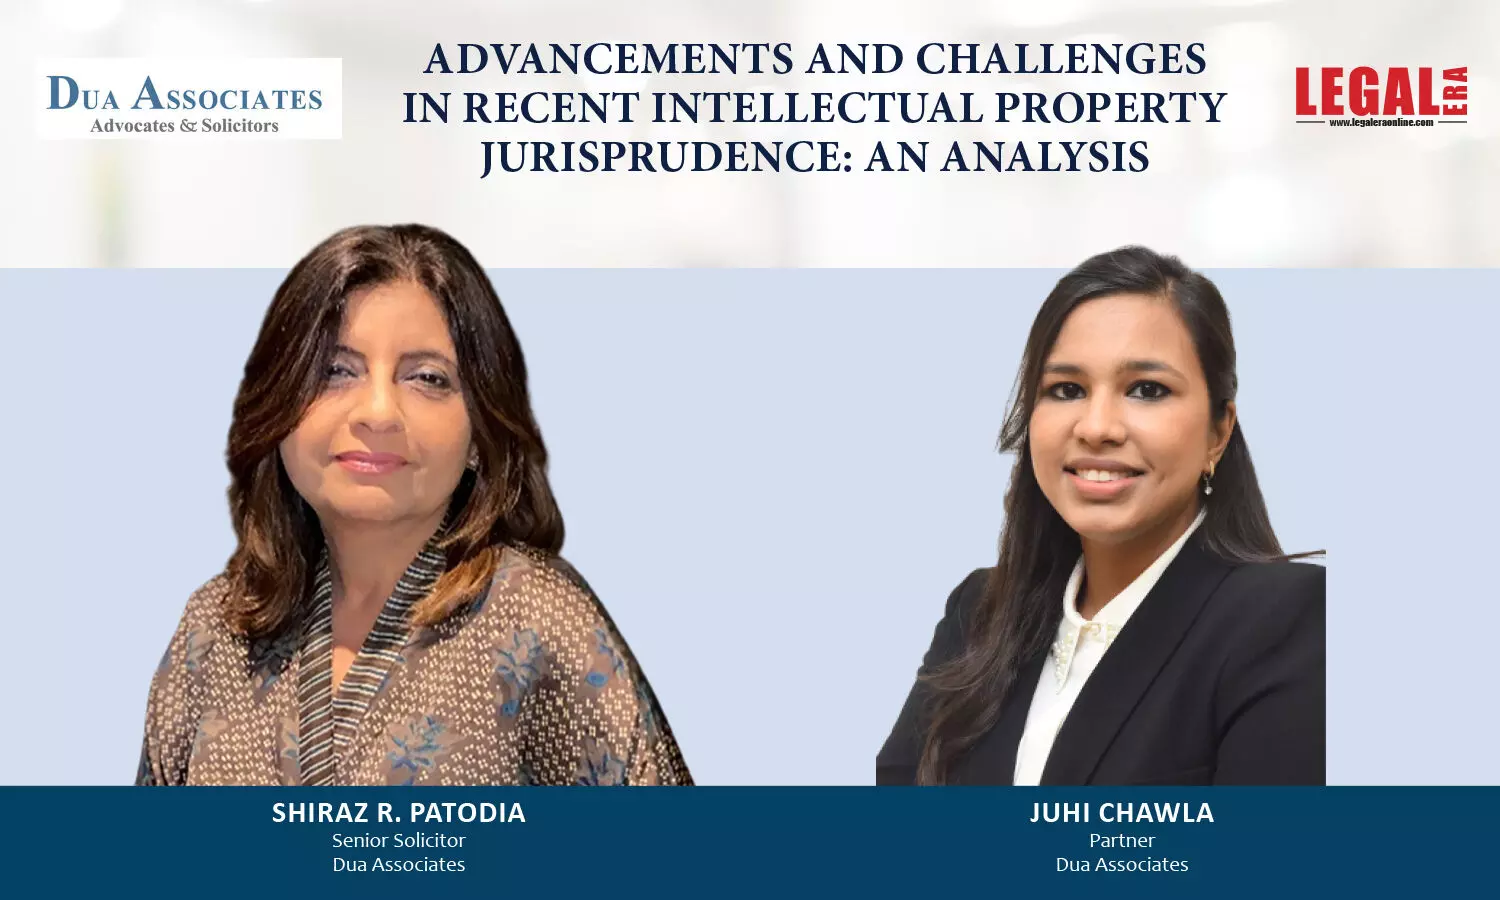 Advancements And Challenges In Recent Intellectual Property Jurisprudence: An Analysis